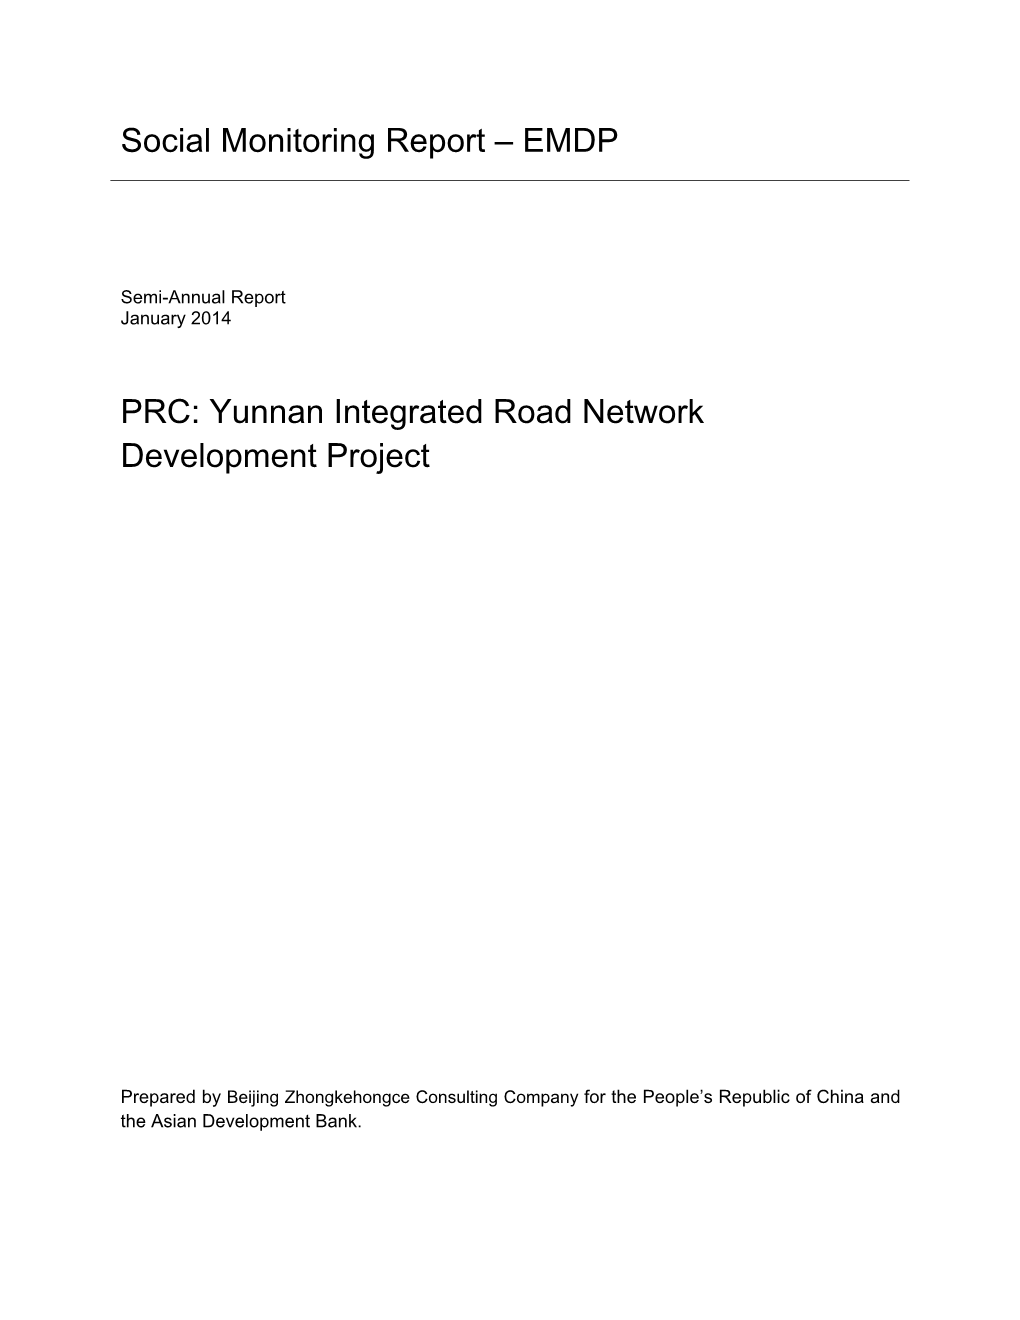 Yunnan Integrated Road Network Development Project